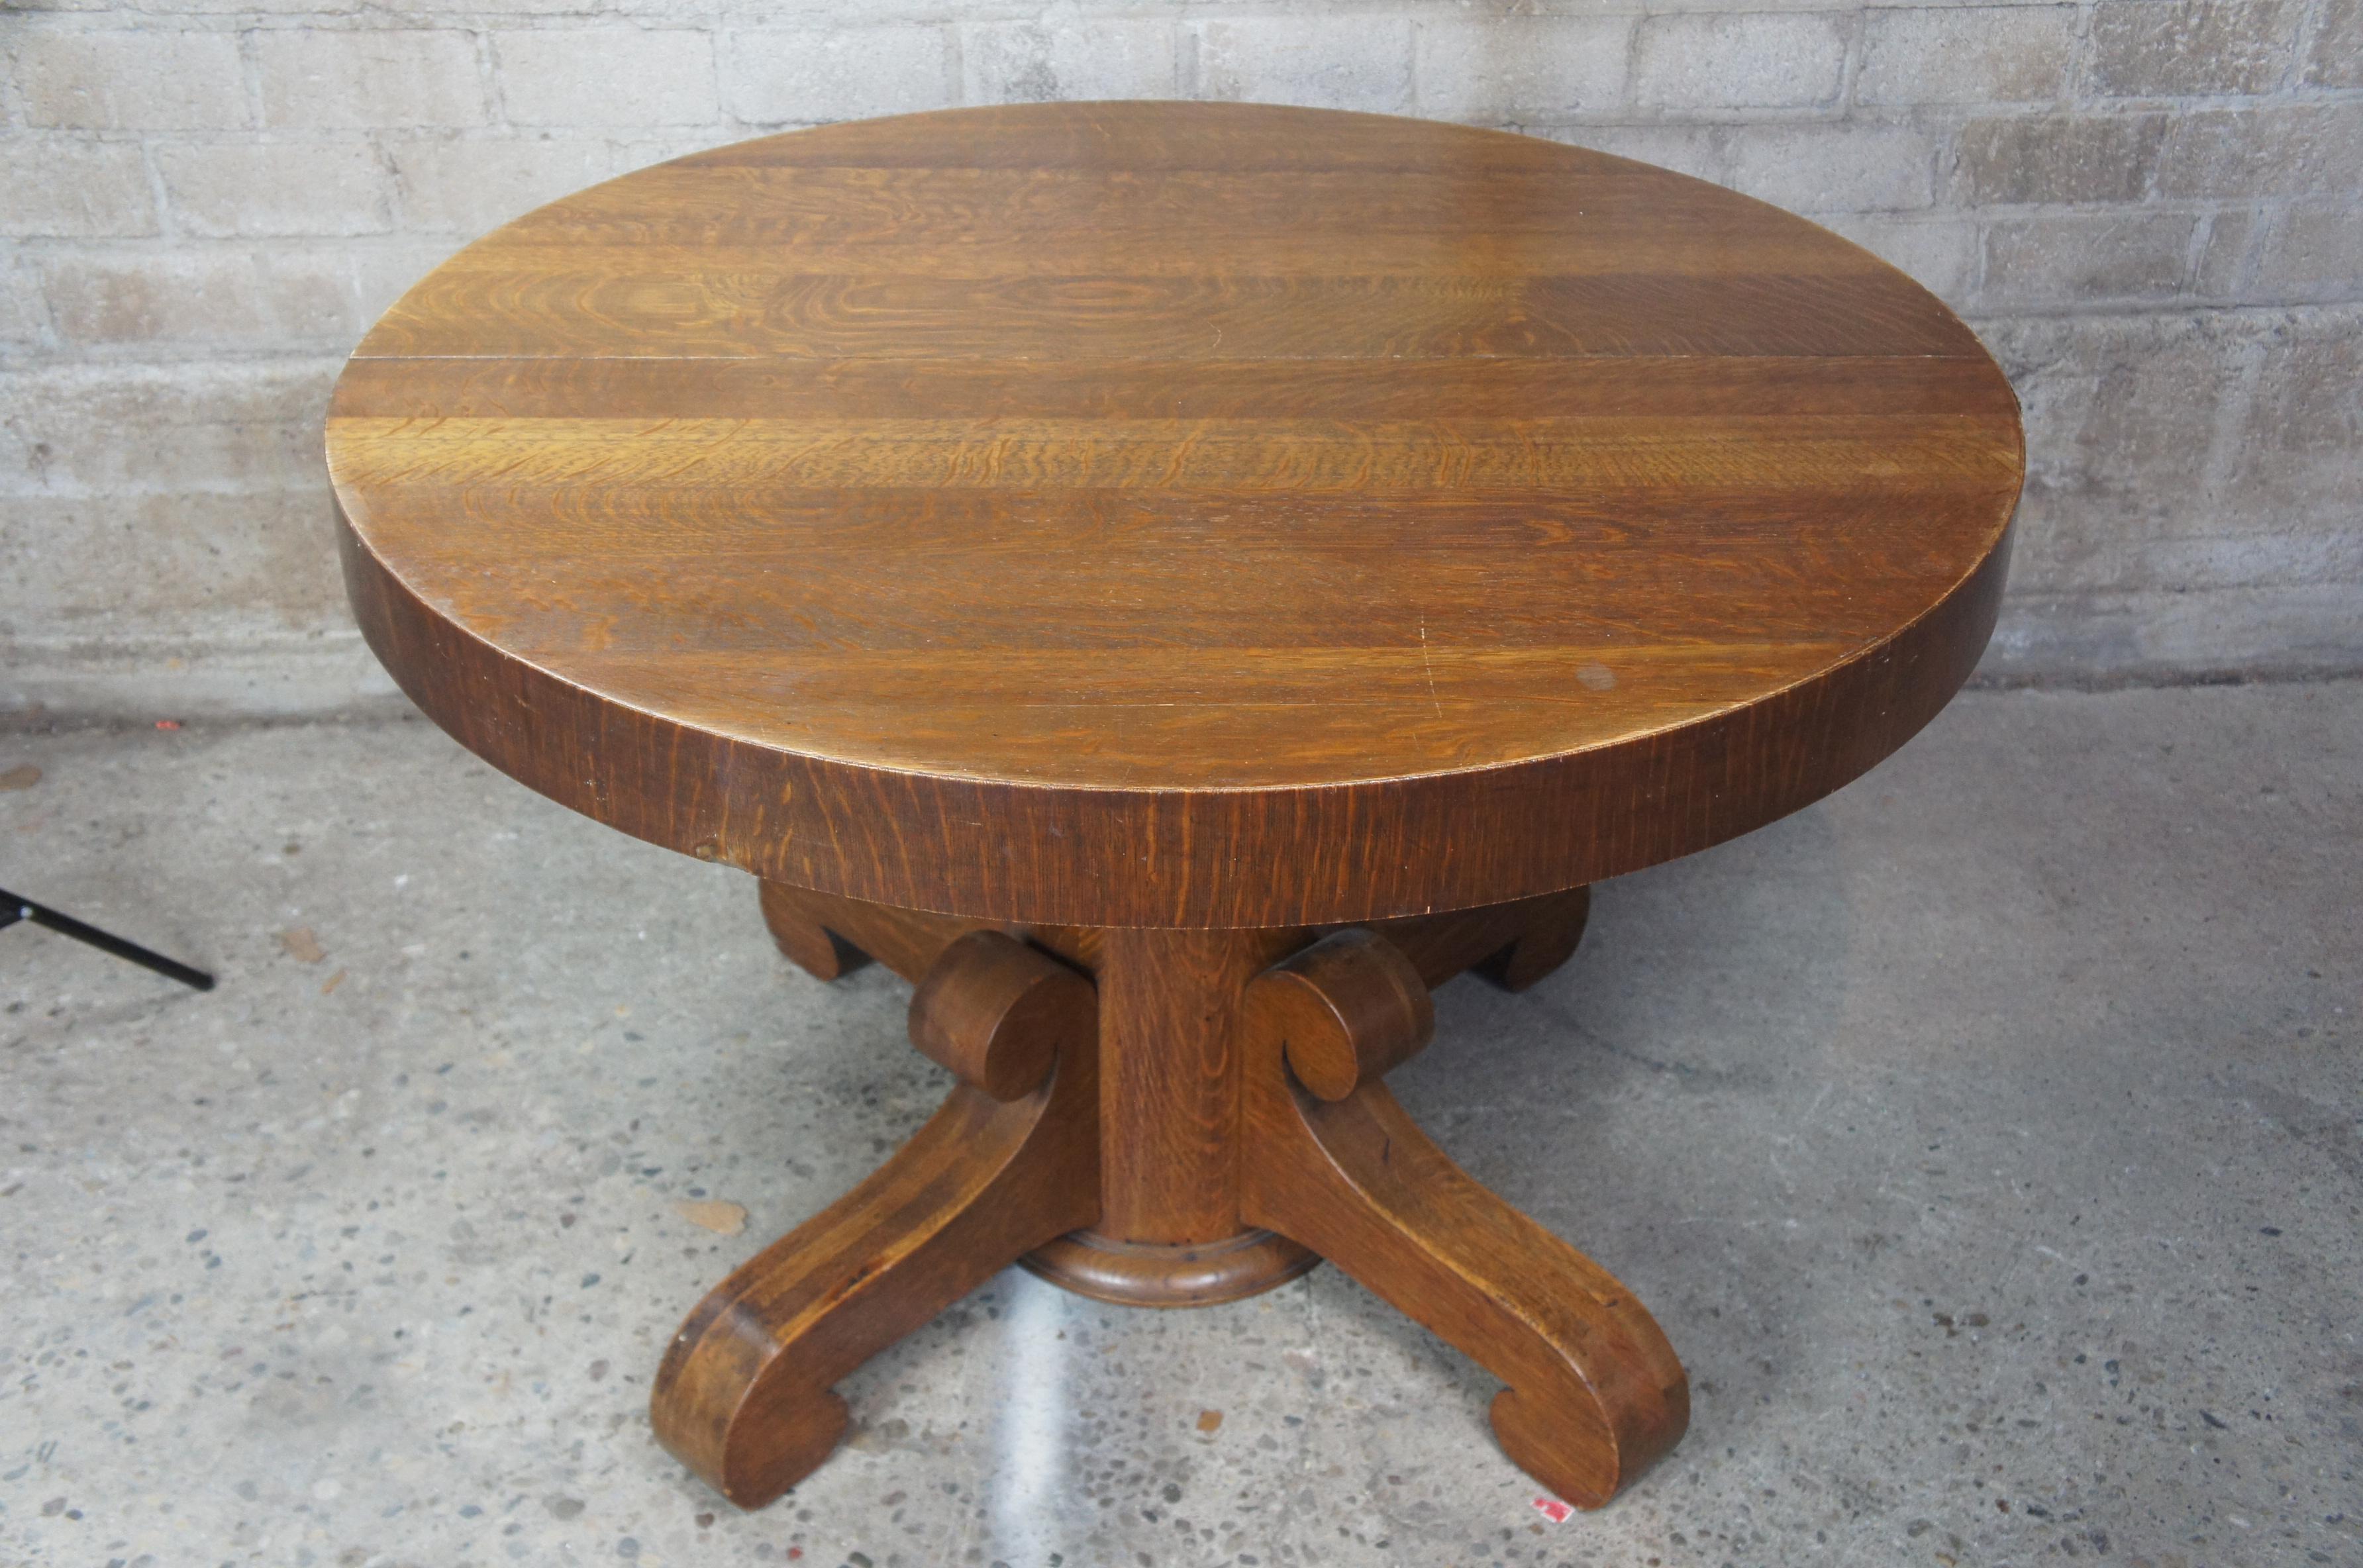 National Furniture Co. Antique Empire Quartersawn Oak Round Dining Table 1